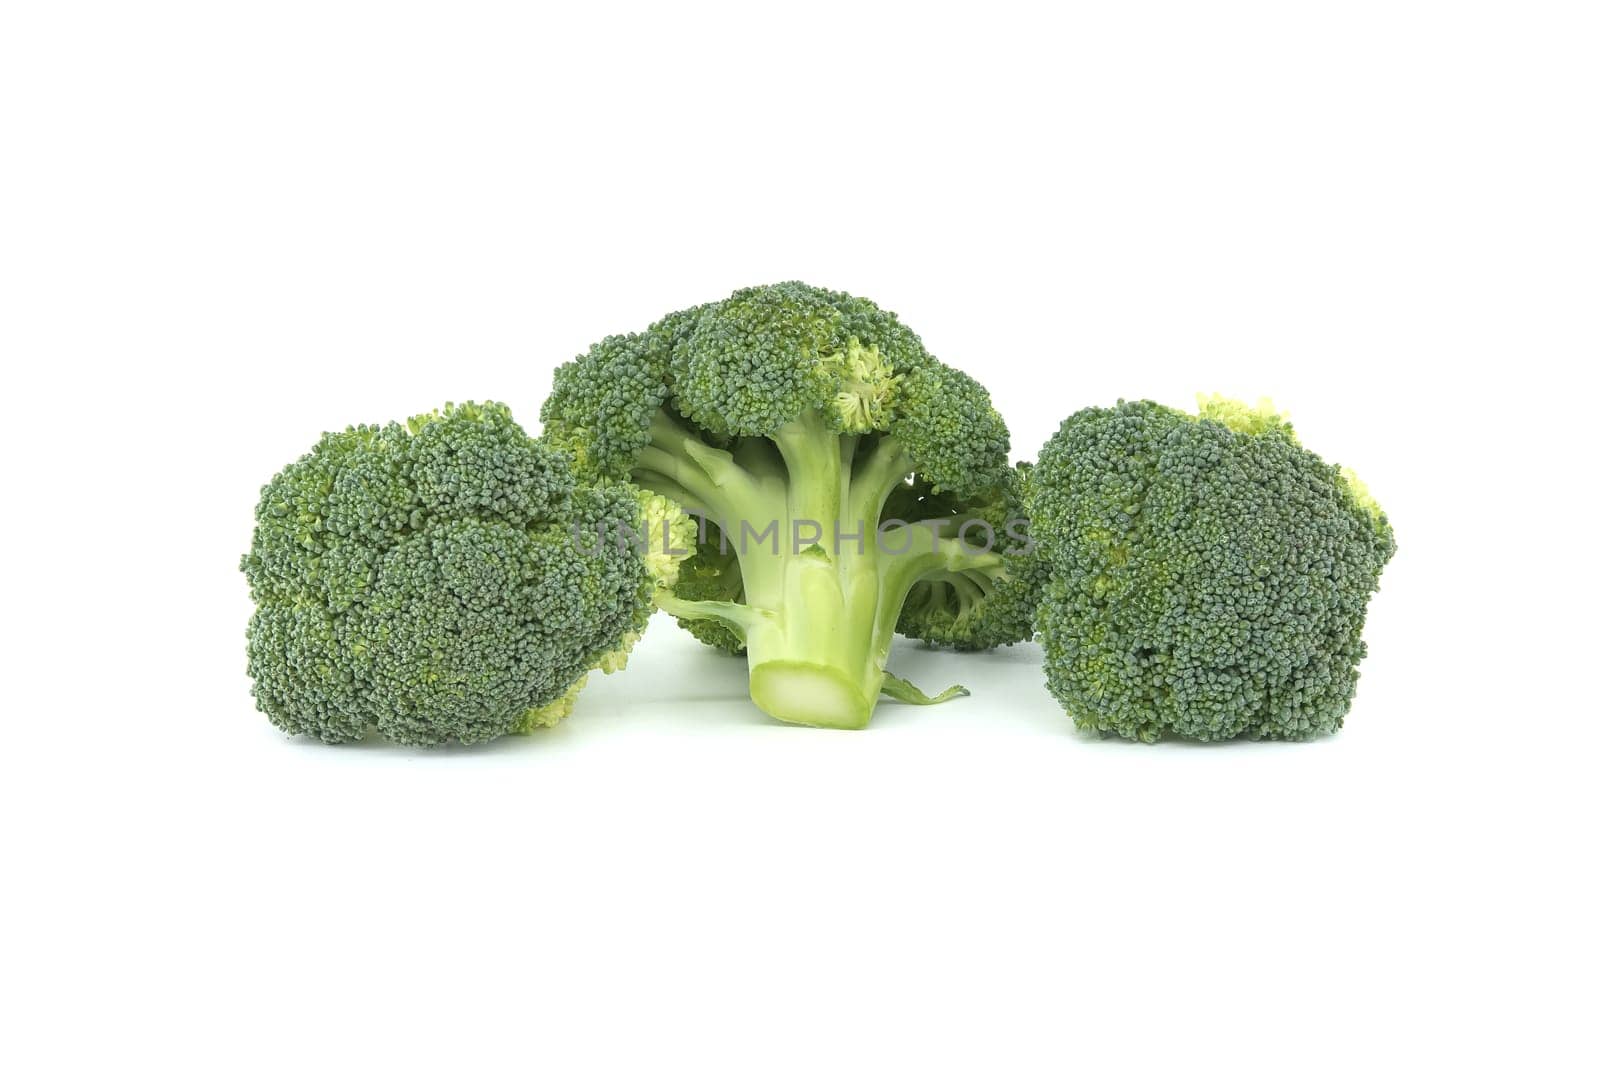 Broccoli florets isolated on white background by NetPix